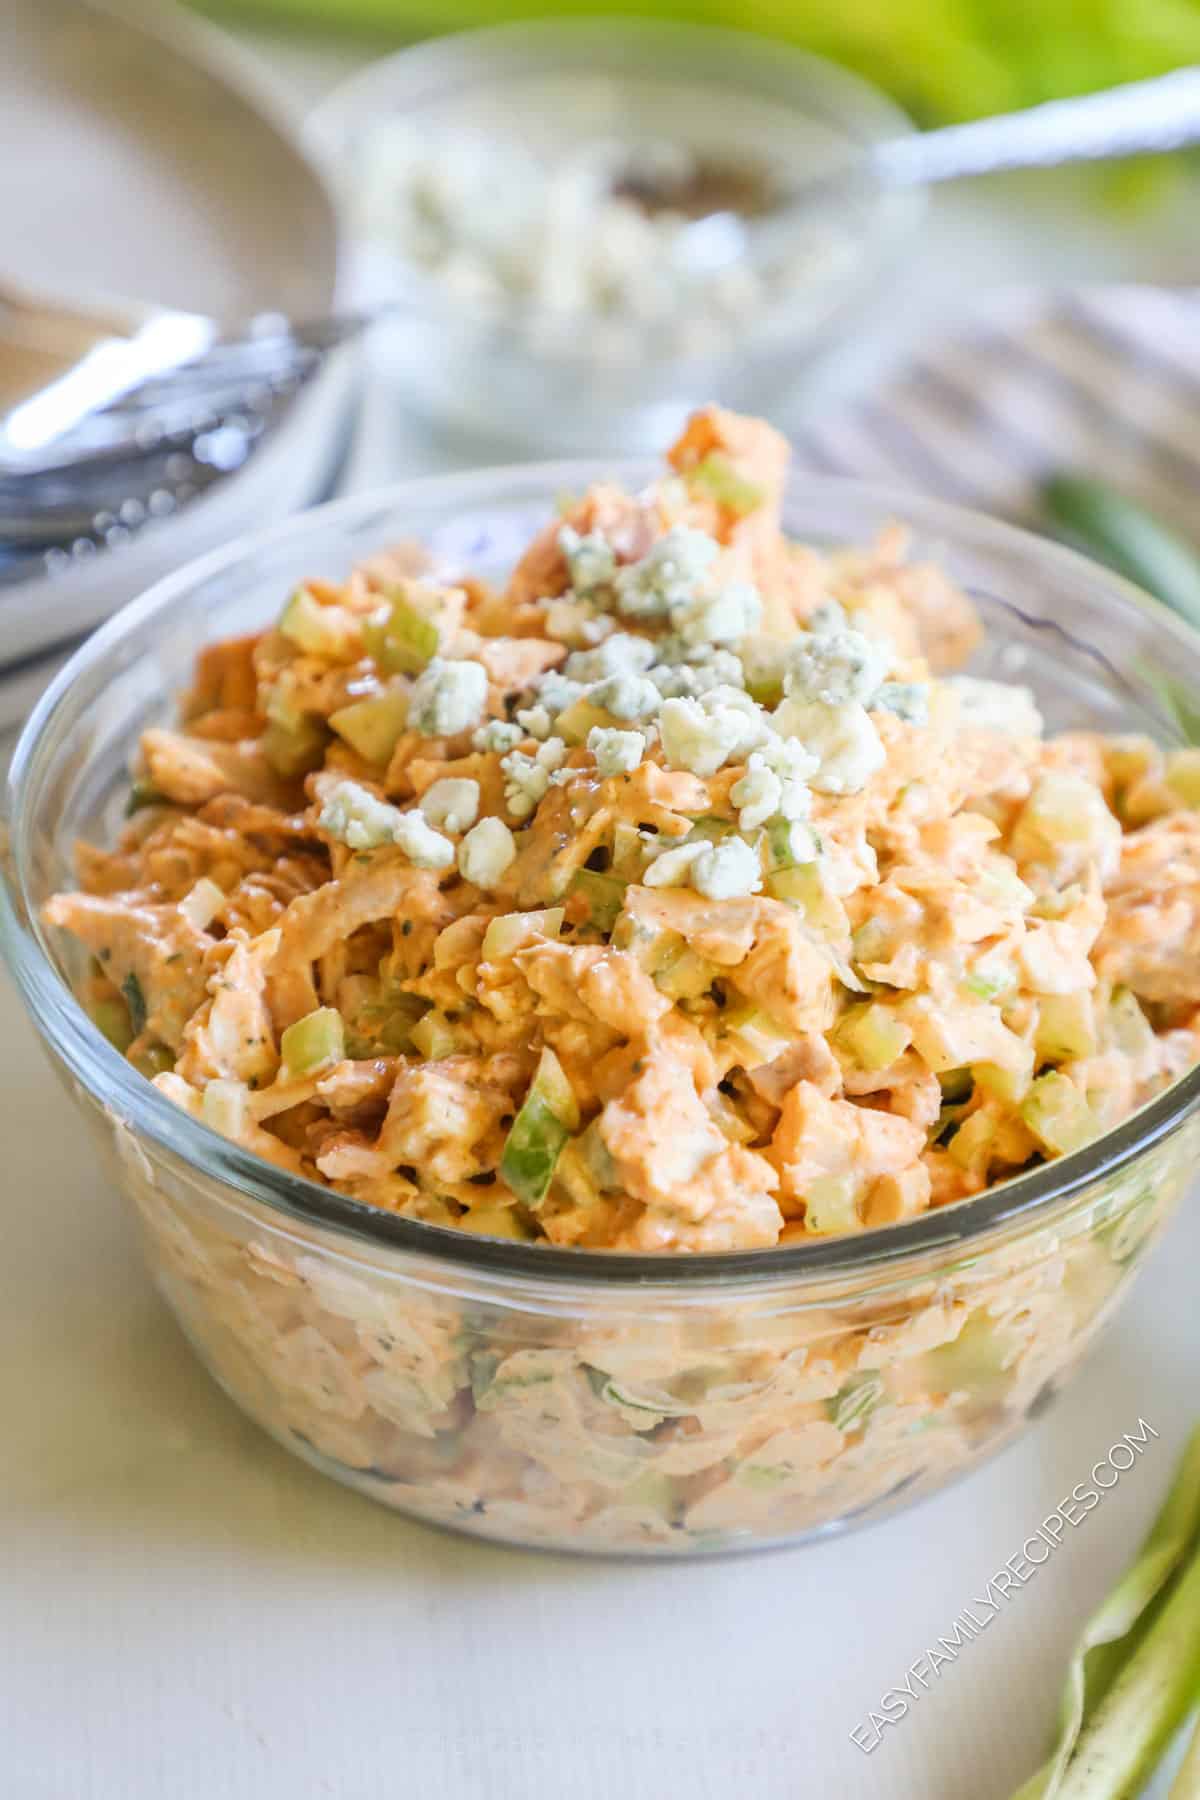 buffalo chicken salad in a bowl, topped with blue cheese crumbles